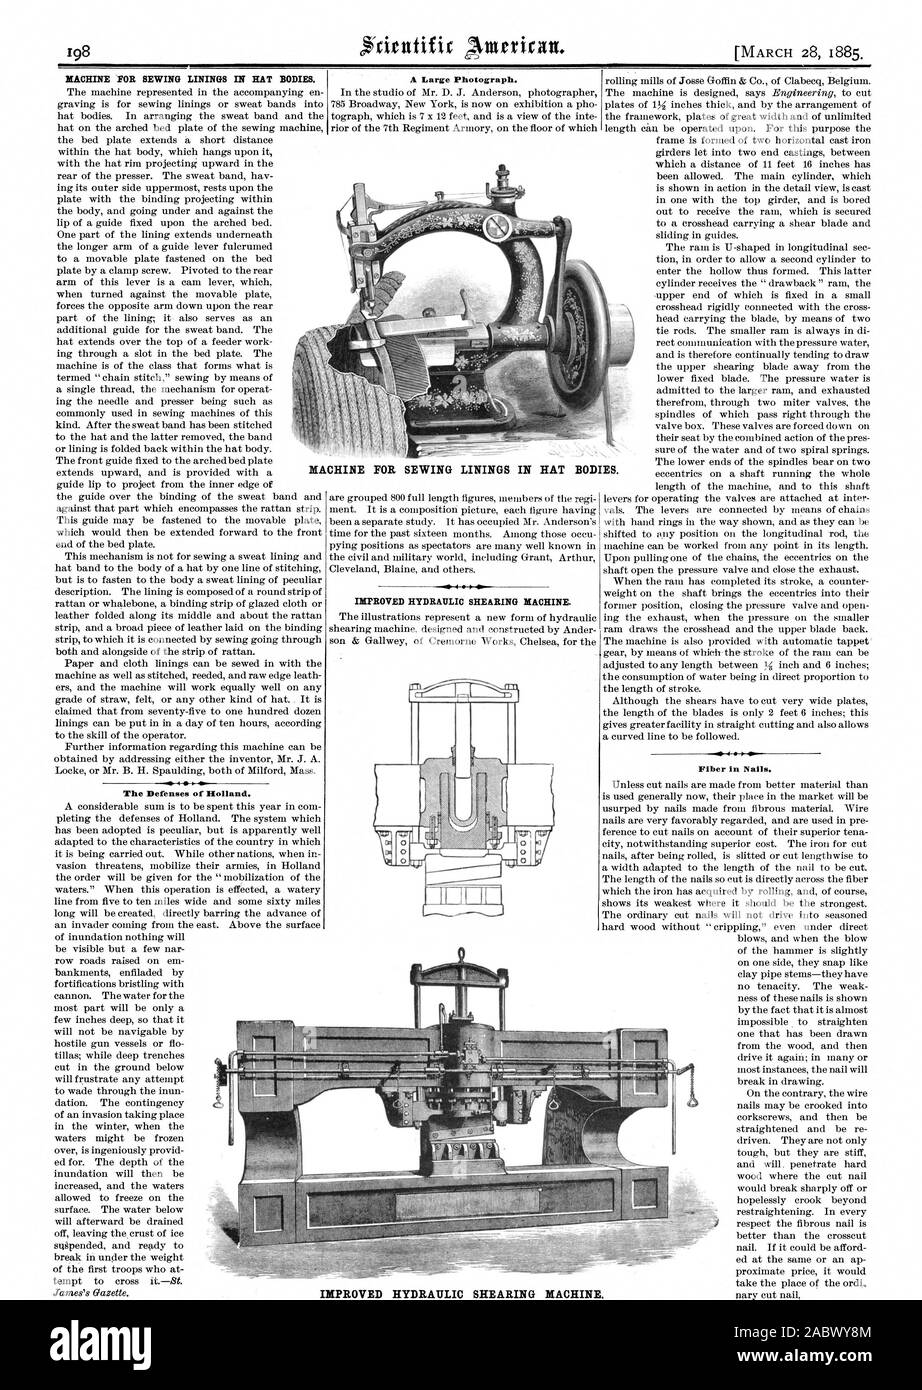 MACHINE FOR SEWING LININGS IN HAT BODIES. The Defenses of Holland. A Large Photograph. IMPROVED HYDRAULIC SHEARING MACHINE. Fiber in Nails. MACHINE FOR SEWING LININGS IN HAT BODIES. IMPROVED HYDRAULIC SHEARING MACHINE., scientific american, 1885-03-28 Stock Photo